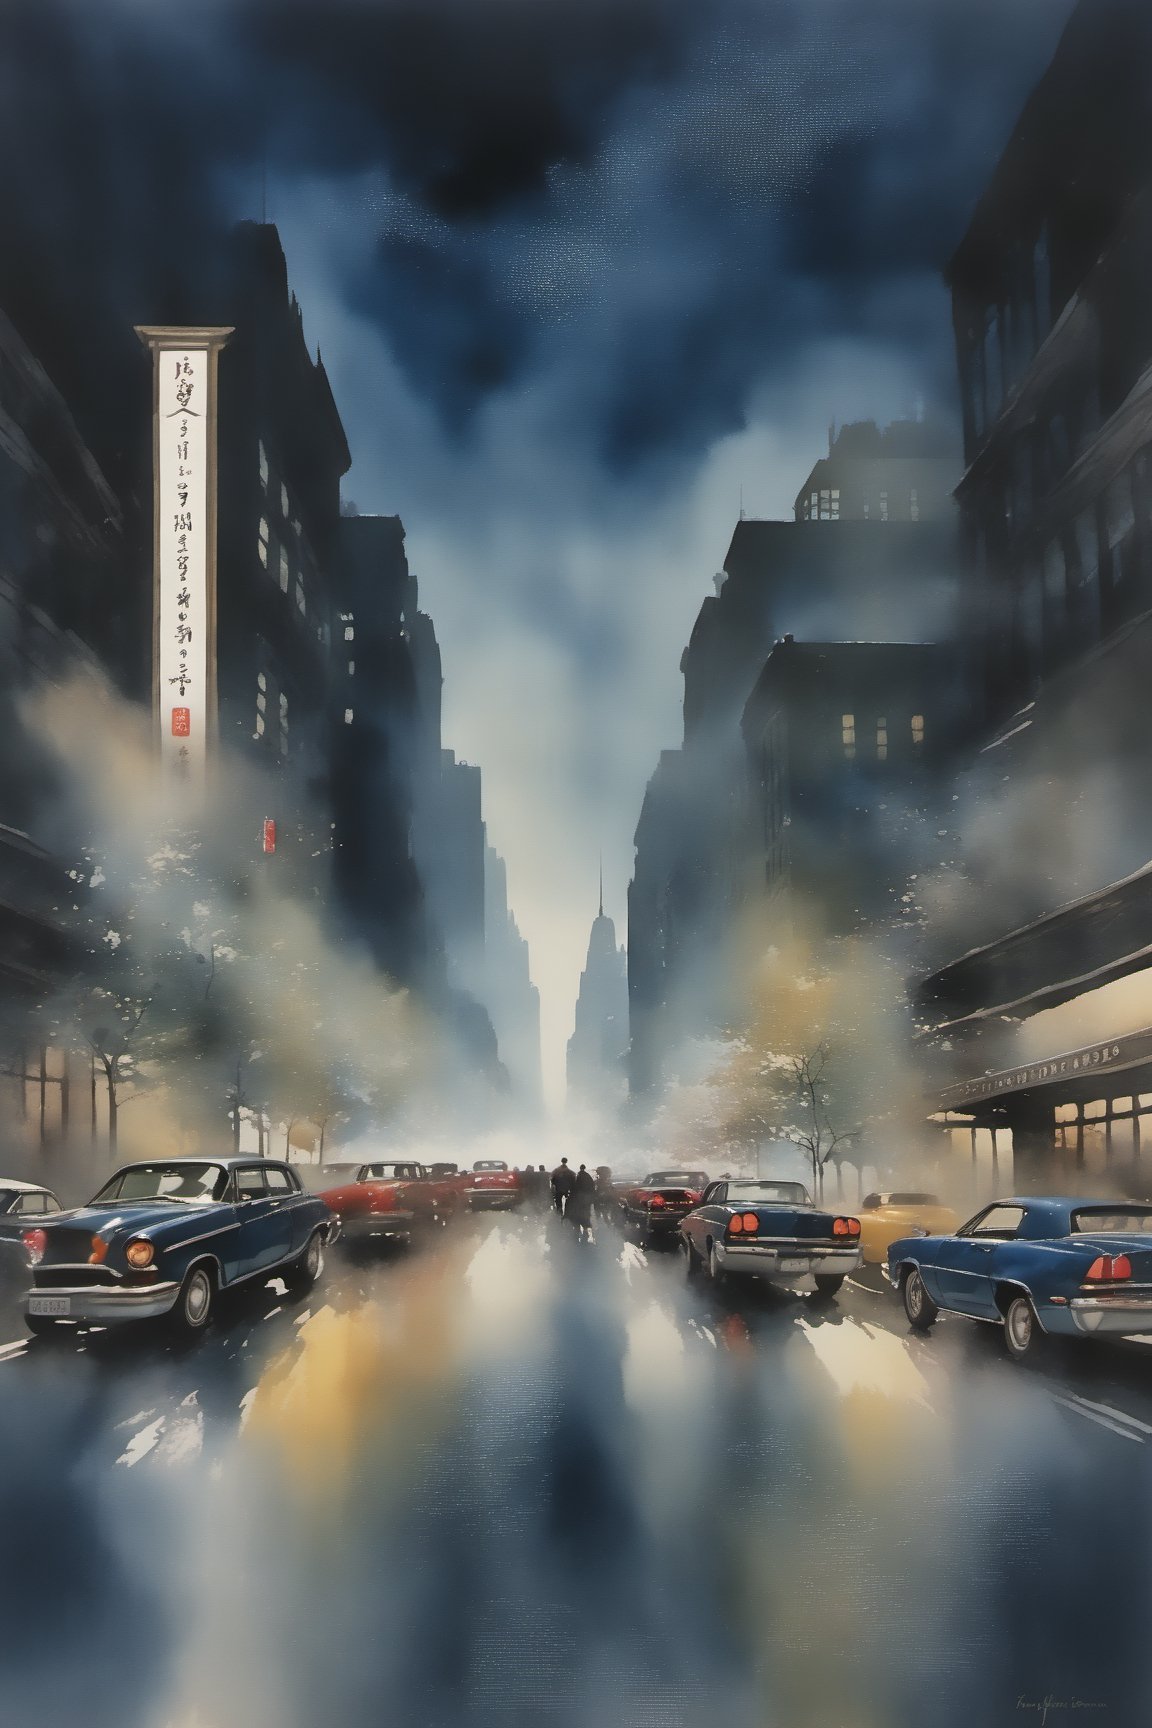 (masterpiece),(watercolor painting of Jung hun-sung:1.7), (New York night street:1.7), buildings,cars, people, ,Night scene, (watercolor paint smudged:1) ,night city,  dark_blue sky,